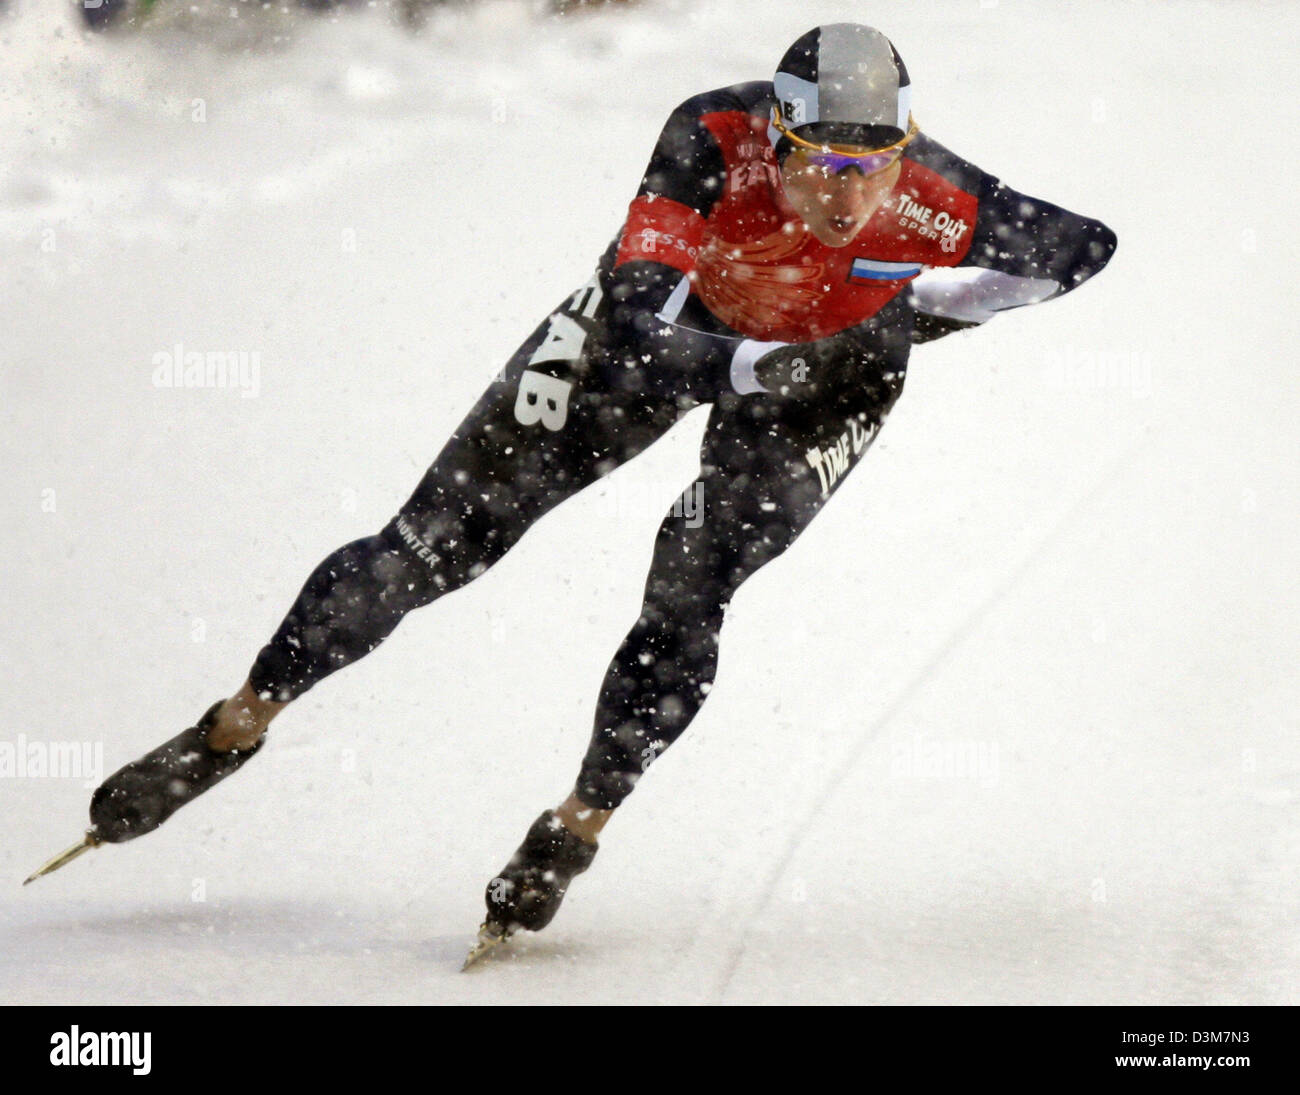 (dpa) - Russian skater Swetlana Schukowa in action during the women's 1,000-metre-sprint-contest of the Speed skating World Cup in Inzell, Germany, 18 December 2005. Schukowa won the competition in front of Dutch skaters Els Murris and Sanne van der Star. Photo: Matthias Schrader Stock Photo